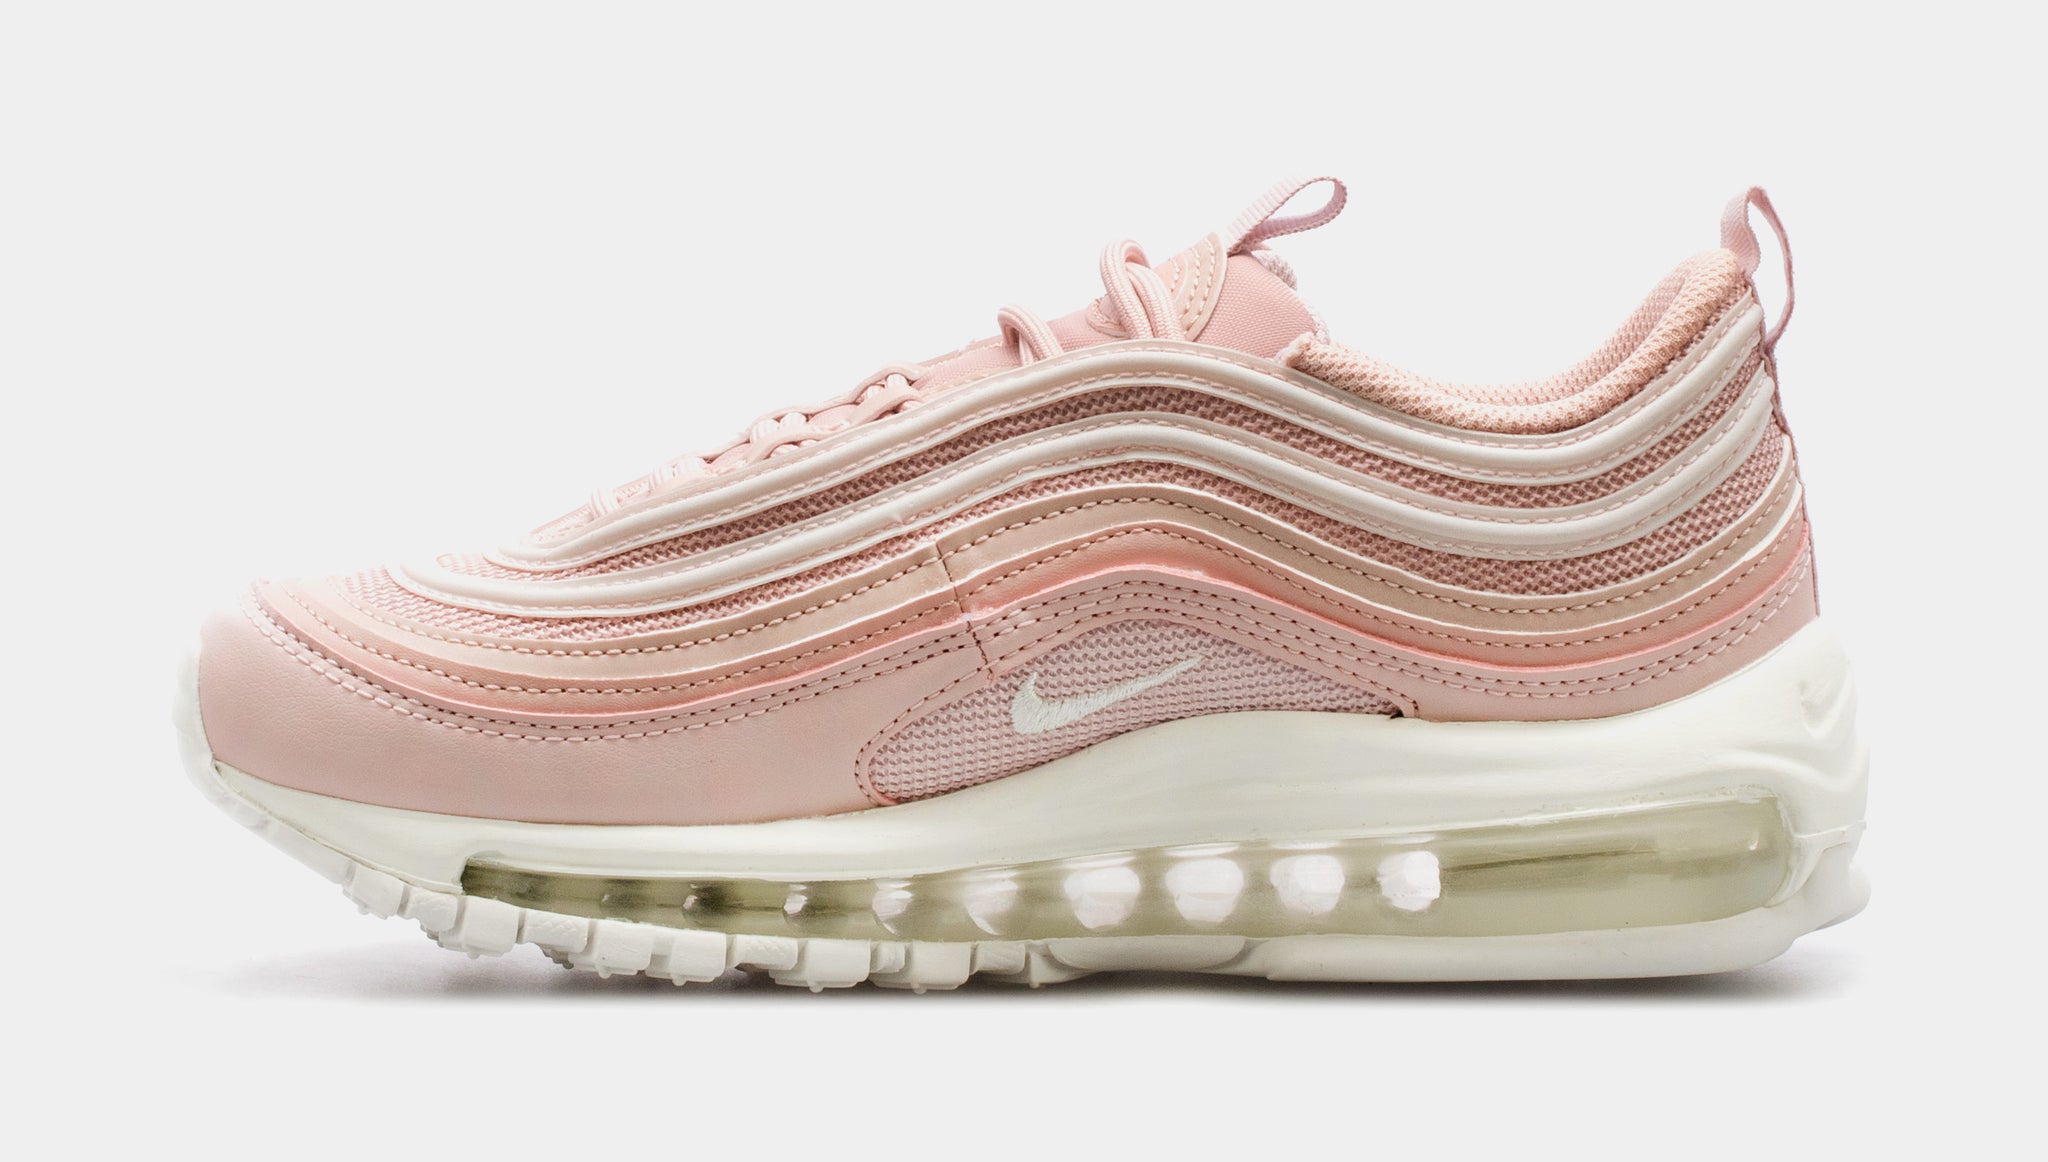 Nike Air Max 97 Womens Lifestyle Shoes Pink DH8016-600 Shoe Palace